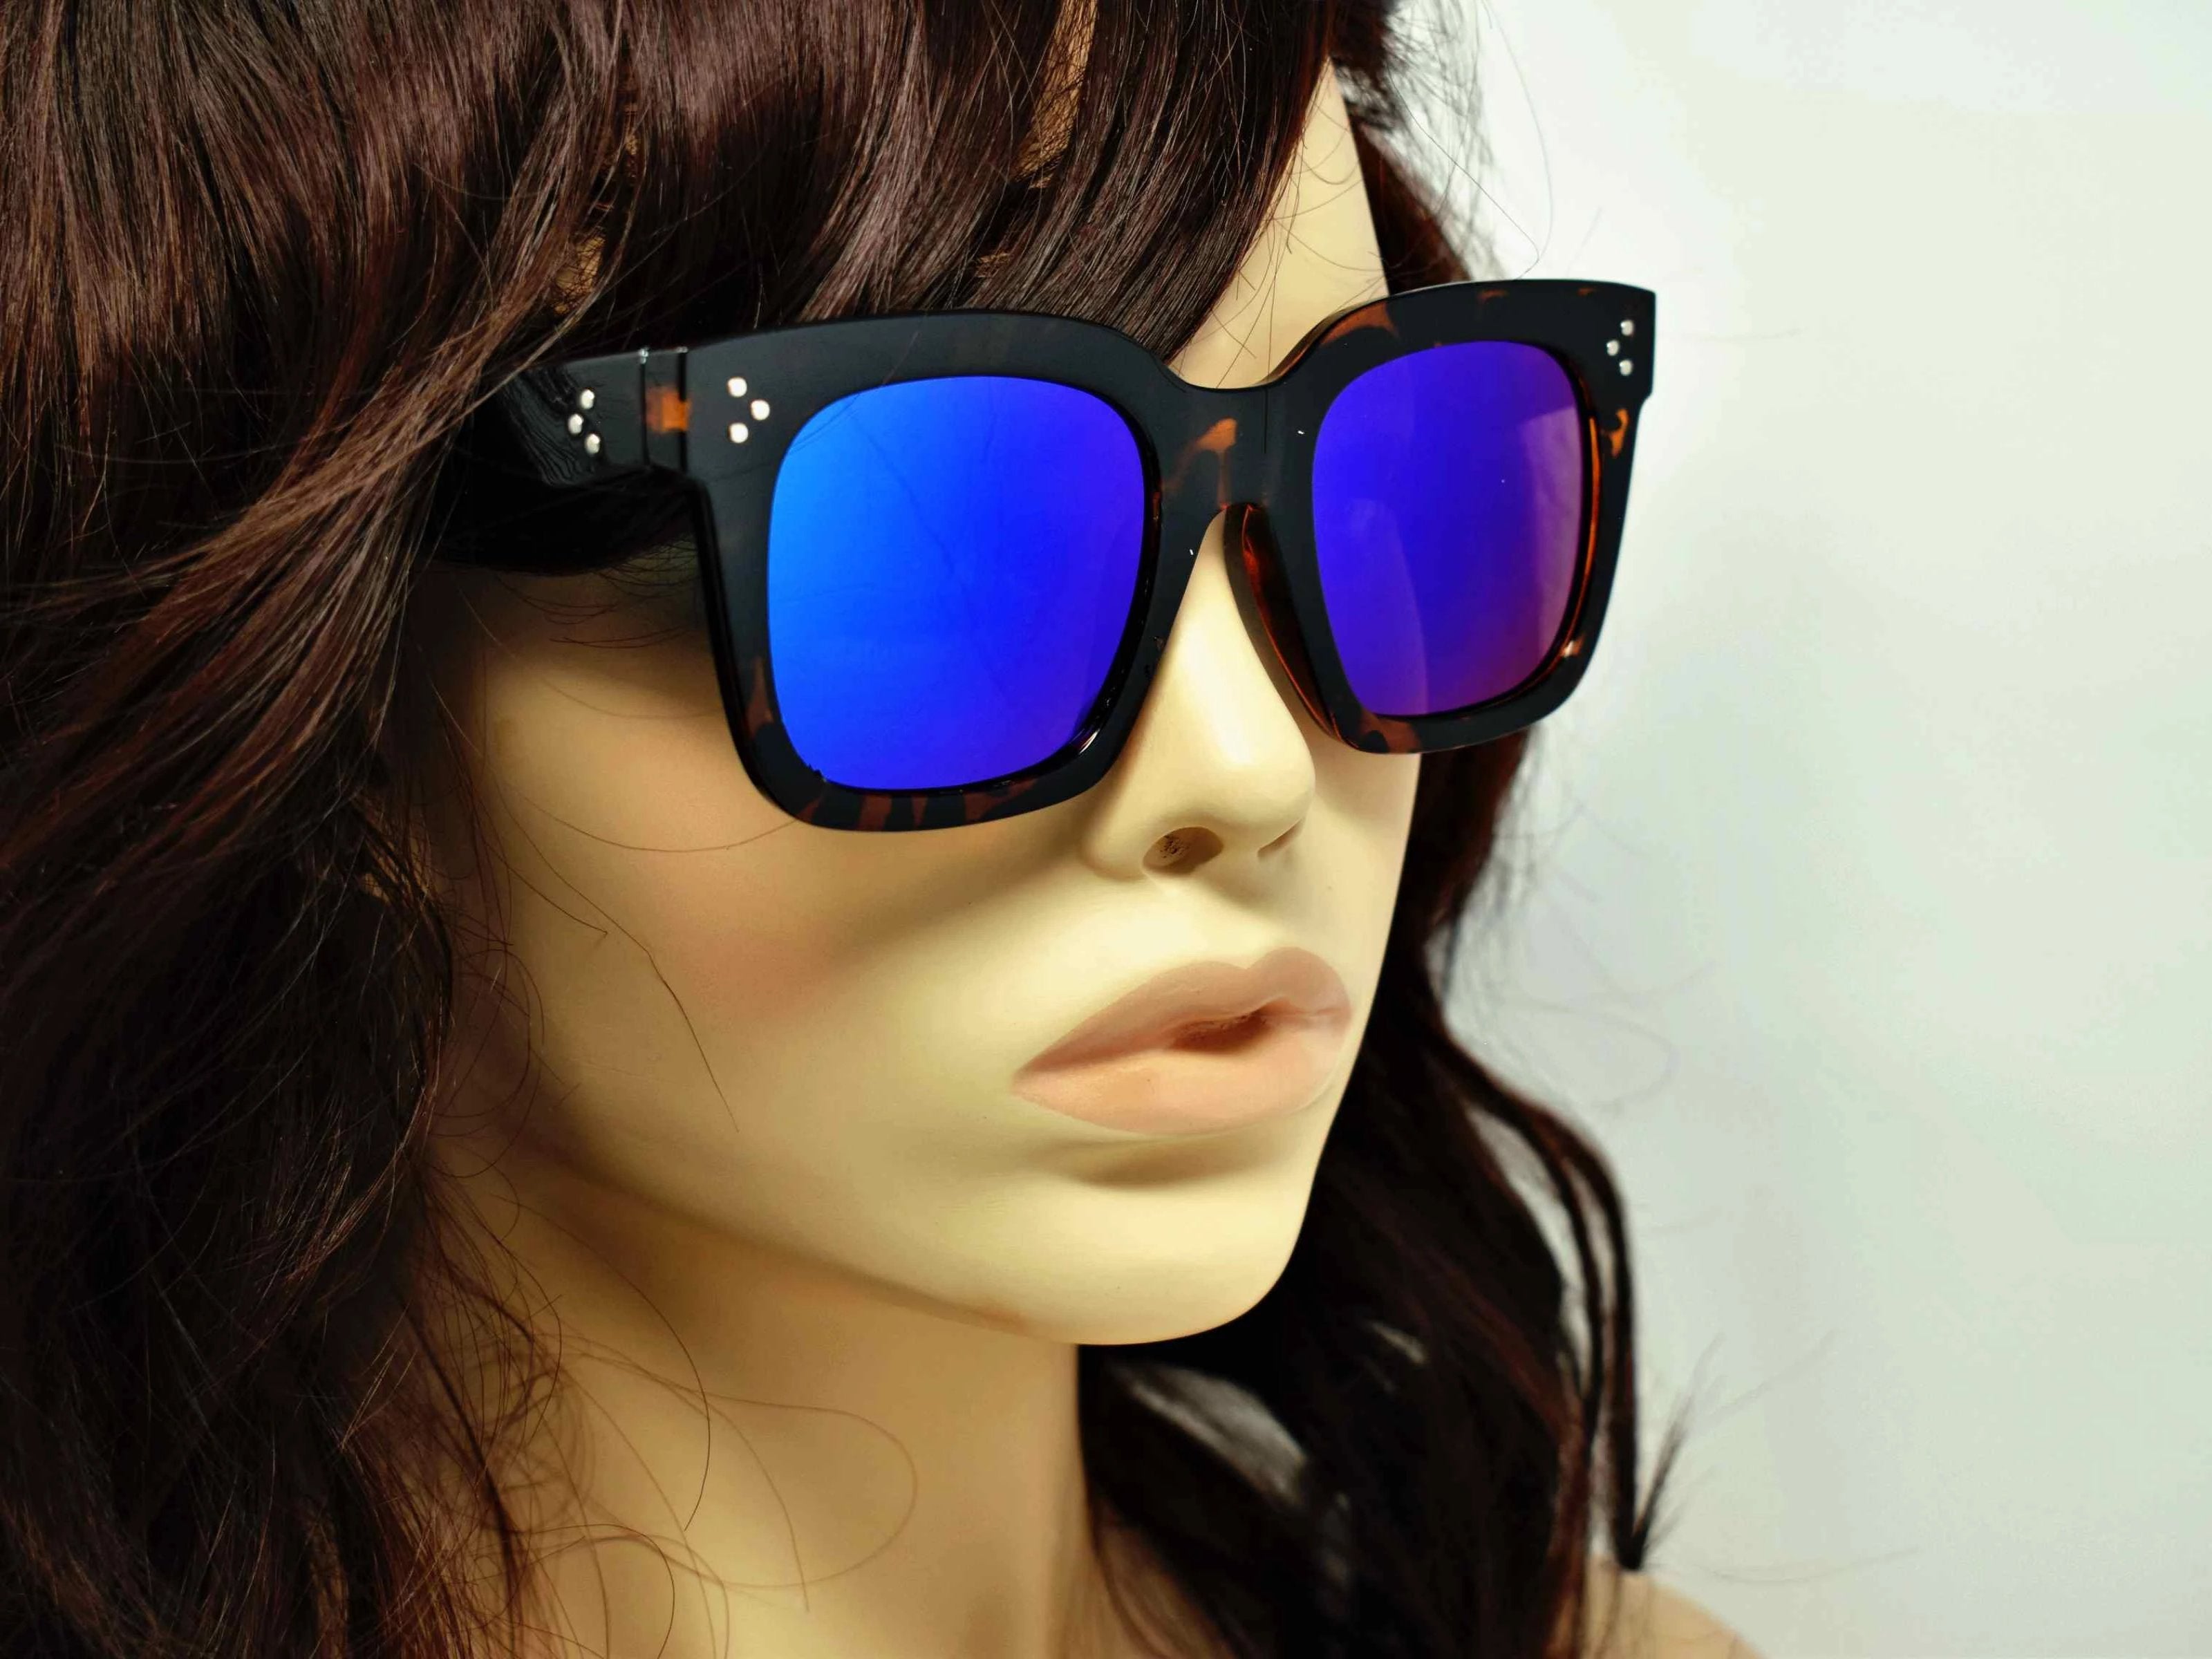 Cool and Classic you can always depend on our Amaranth Leopard framed sunglasses with a blue mirrored lens in a wayfarer shape.